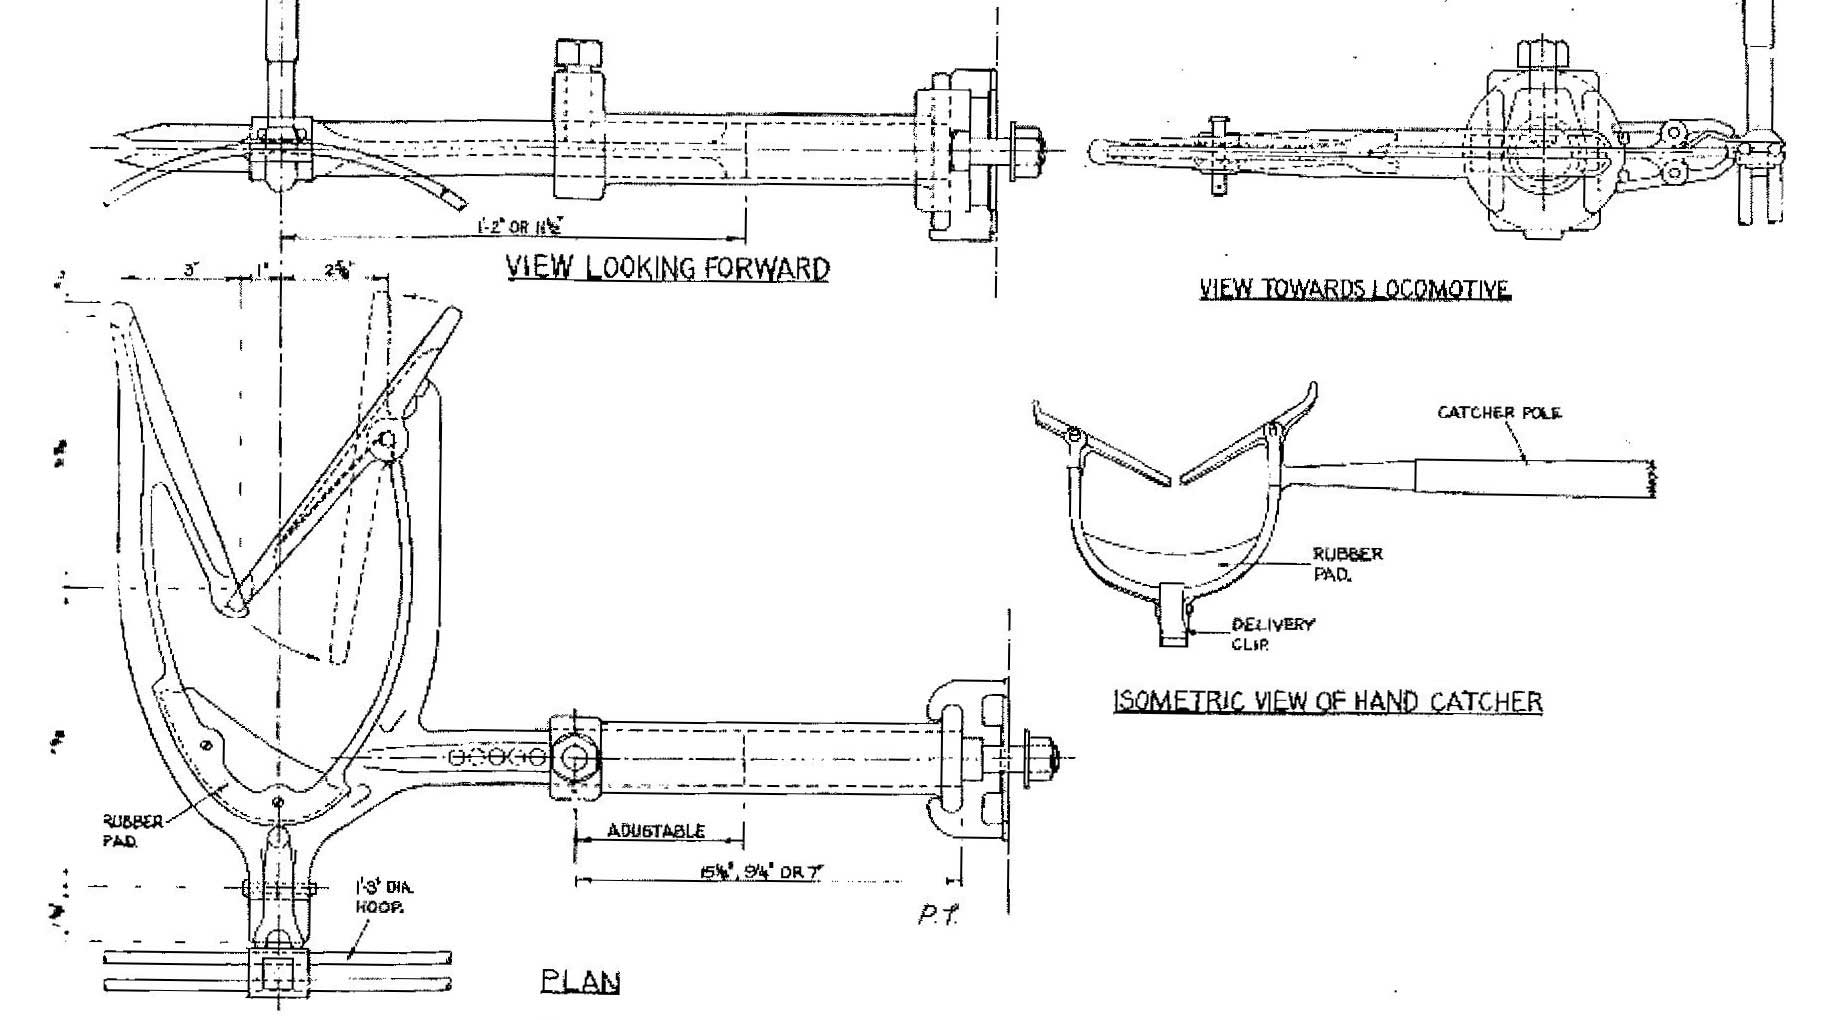 Drawing of Bryson tablet exchanger head on locomotives